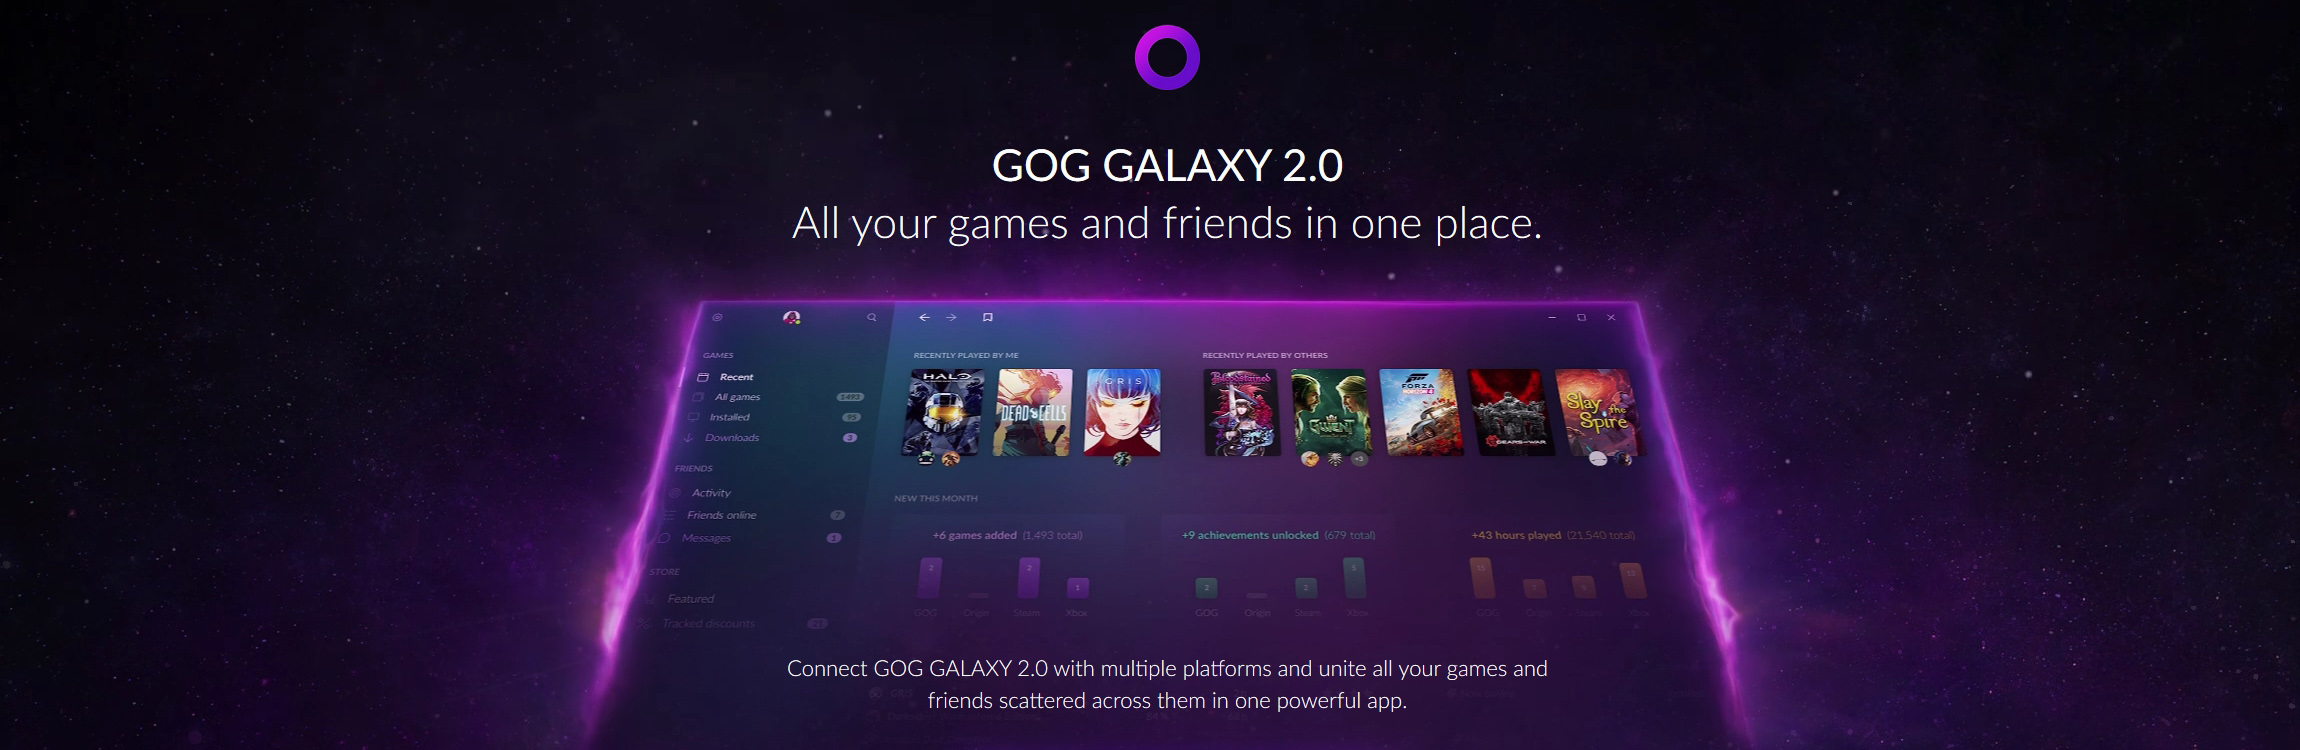 download the last version for apple GOG Galaxy 2.0.68.112